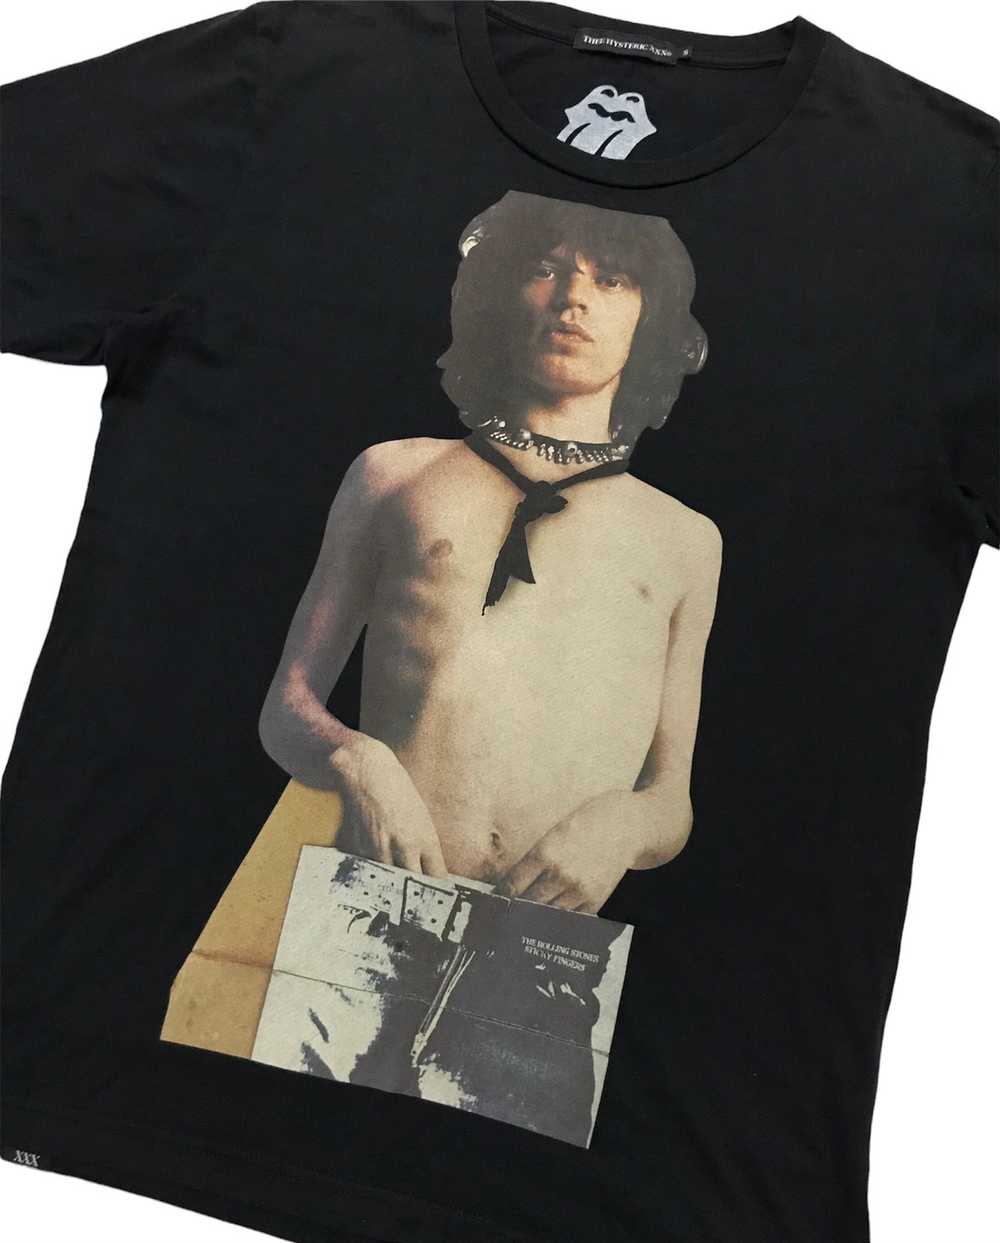 The Rolling Stones x Hysteric Glamour 2010 Tee - image 2